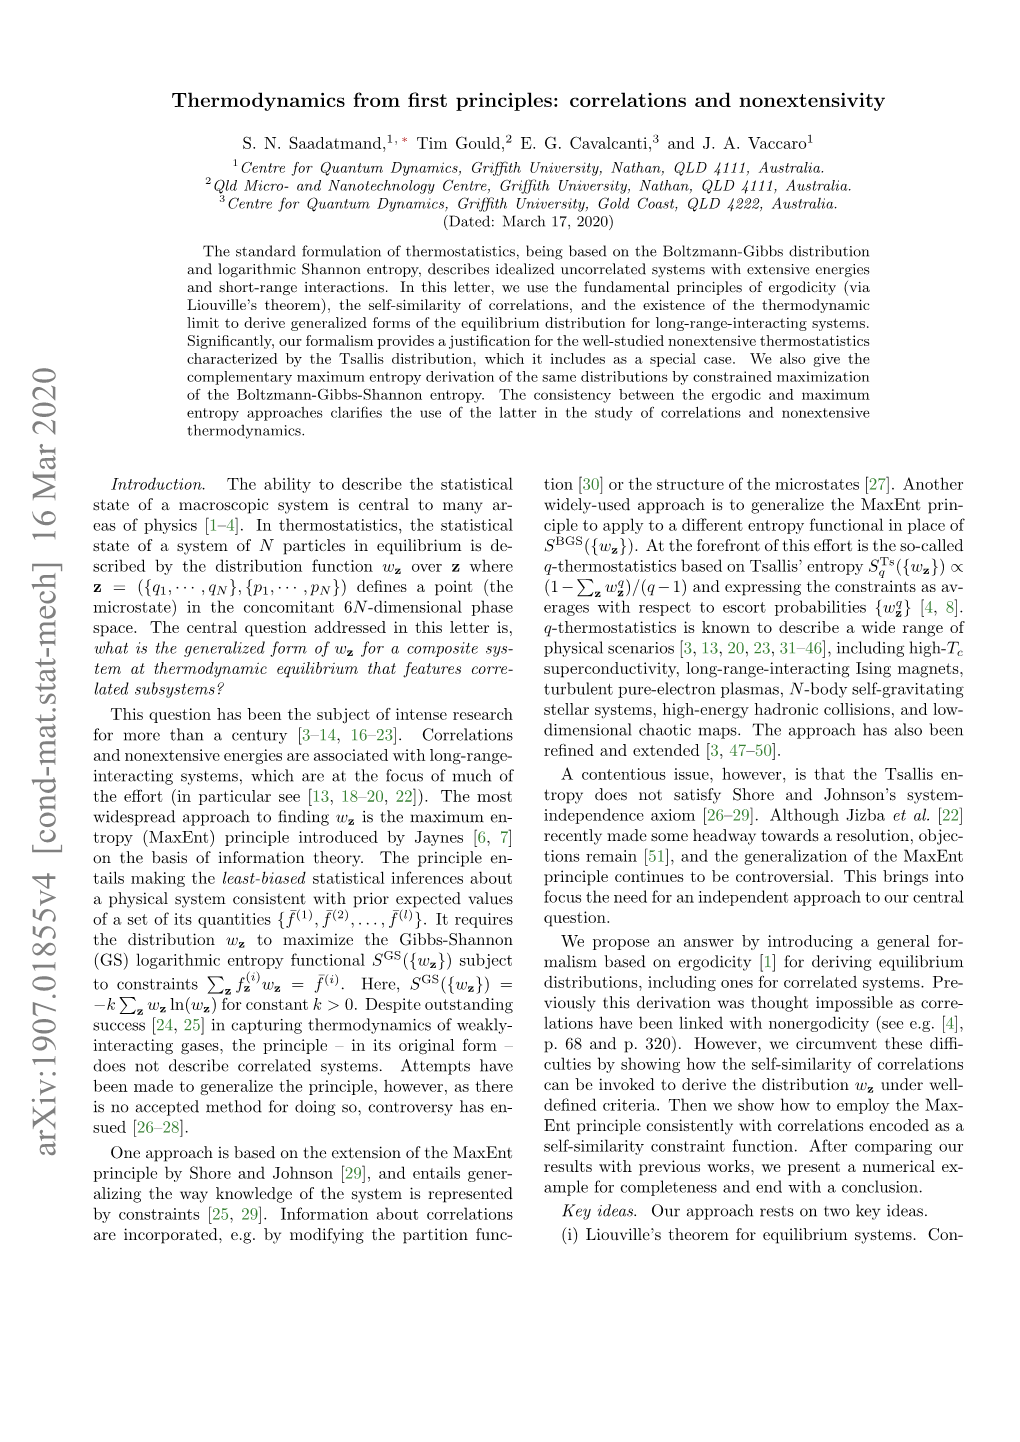 Thermodynamics from First Principles: Correlations and Nonextensivity